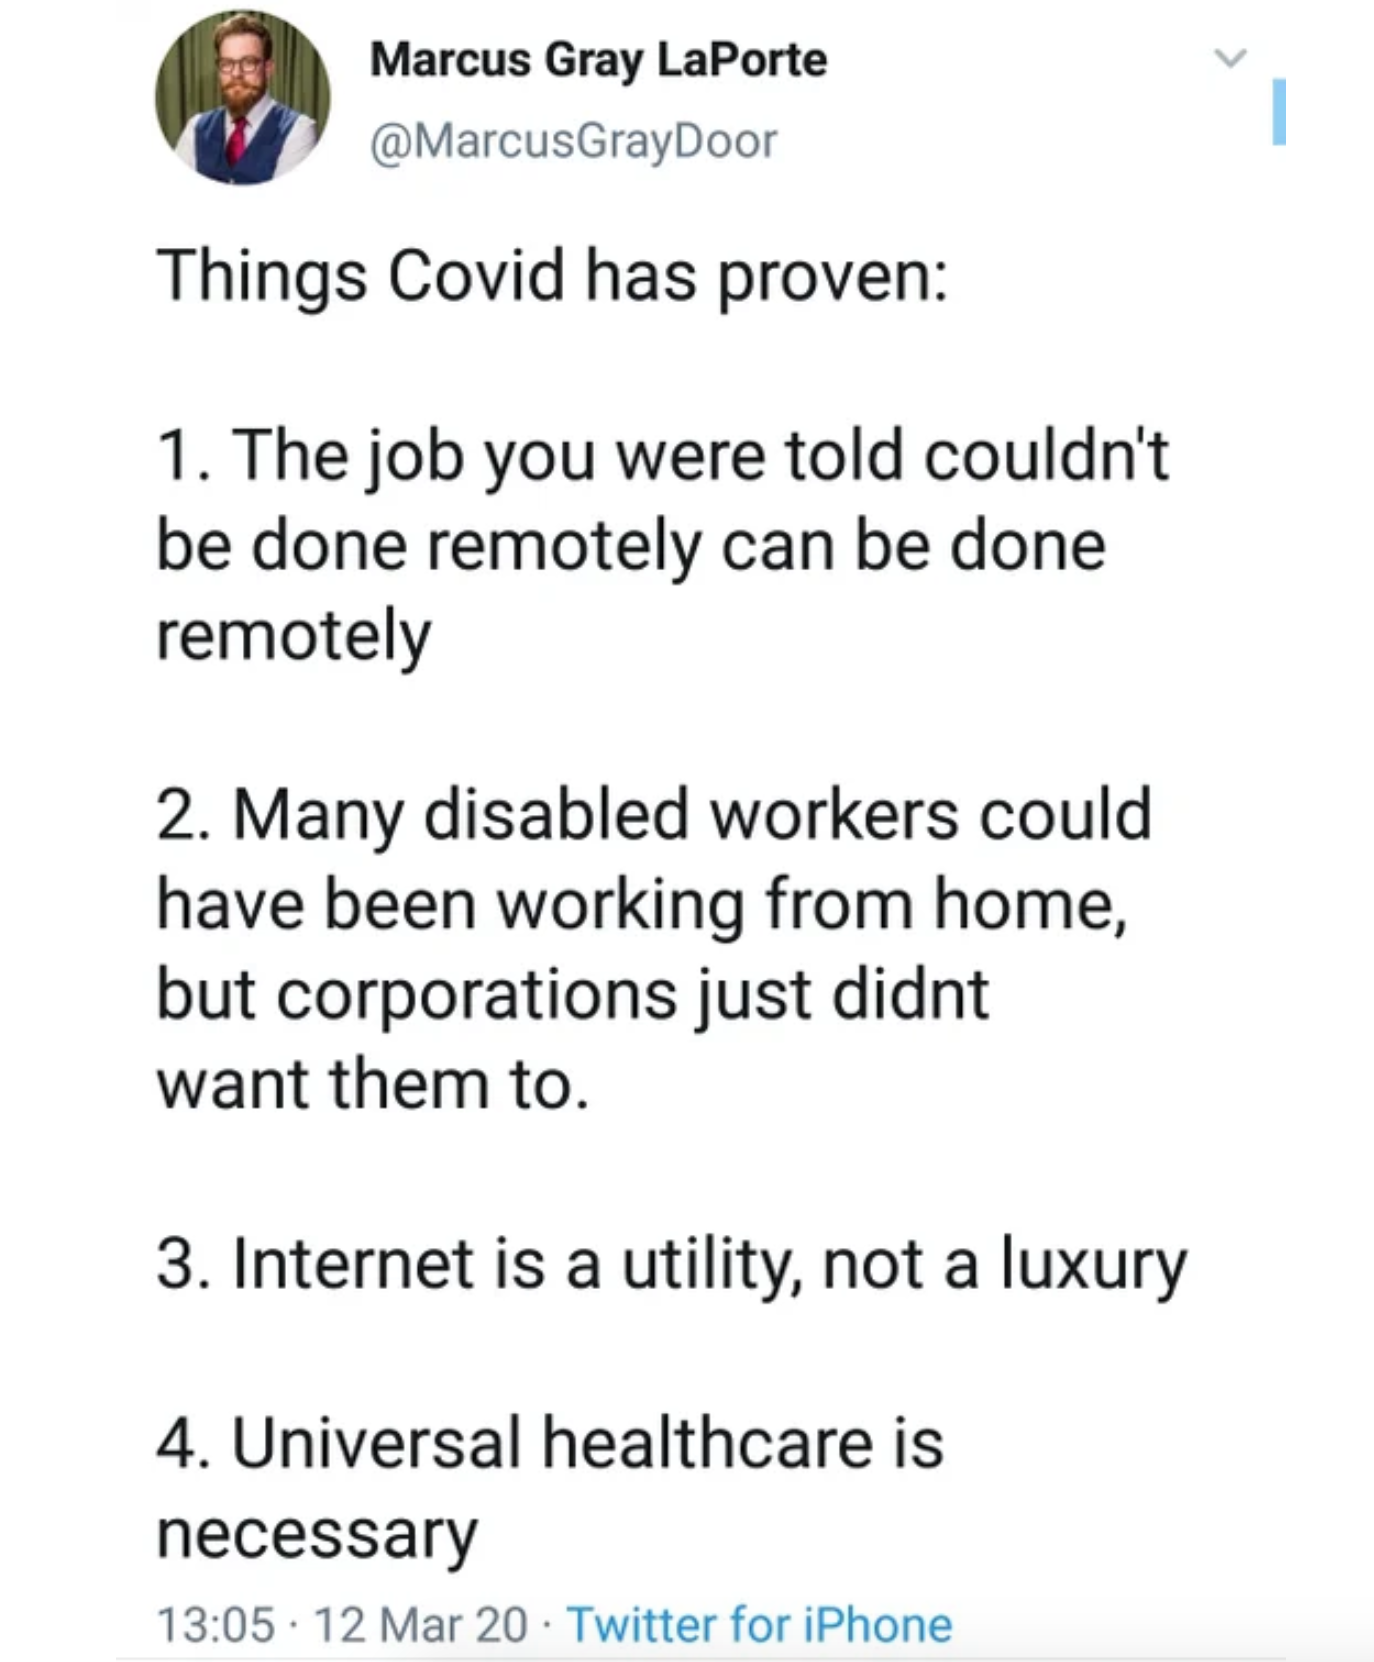 document - Marcus Gray LaPorte Things Covid has proven 1. The job you were told couldn't be done remotely can be done remotely 2. Many disabled workers could have been working from home, but corporations just didnt want them to. 3. Internet is a utility, 